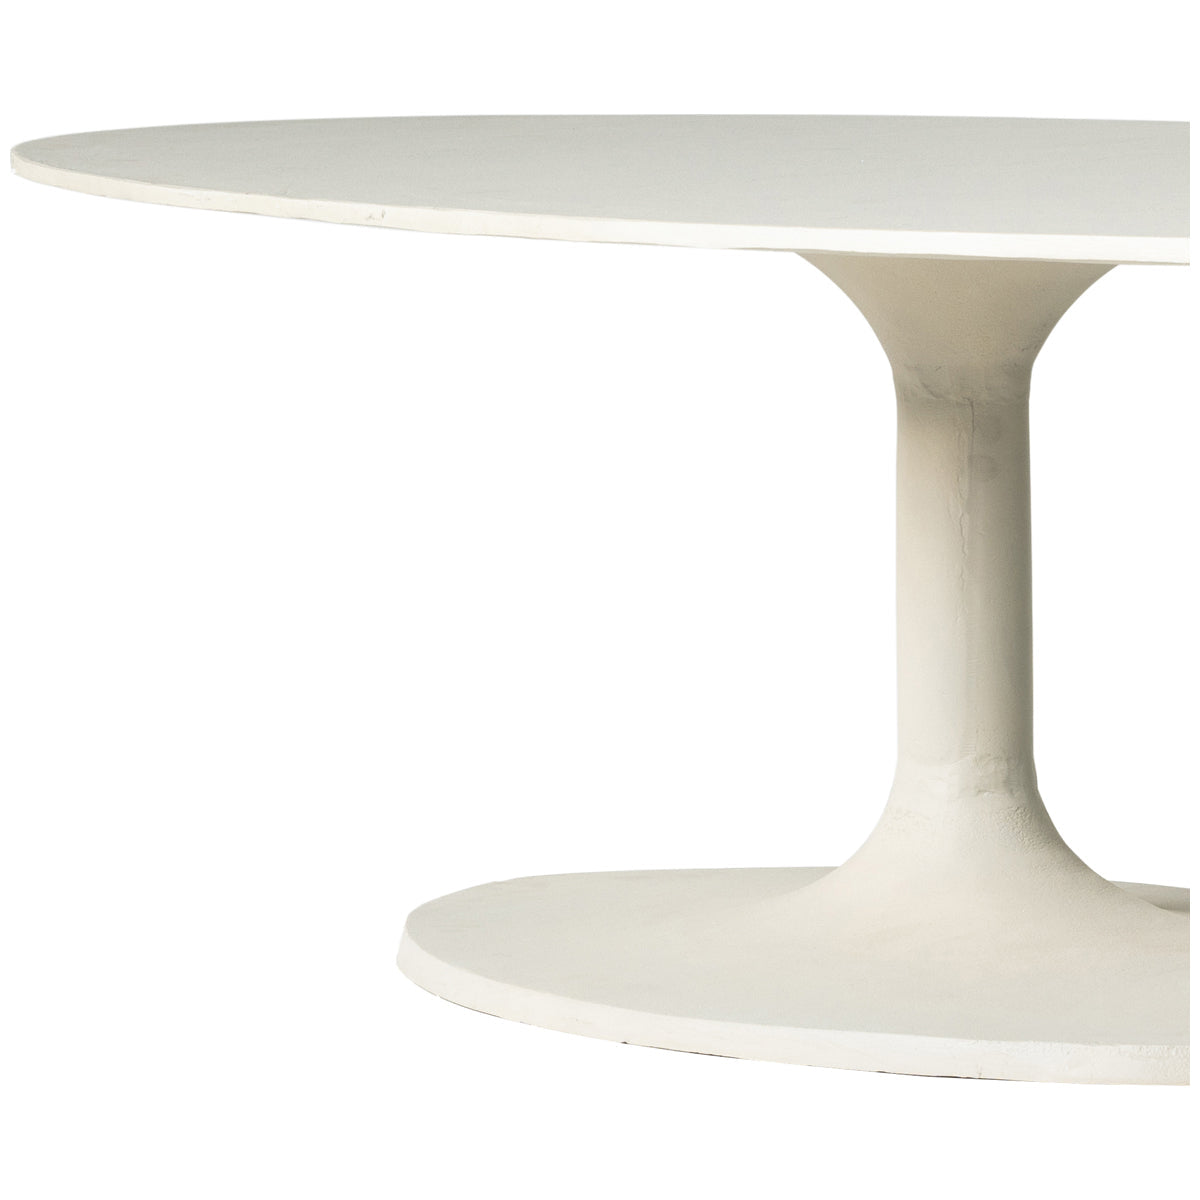 Four Hands Marlow Simone Oval Coffee Table - Matte White